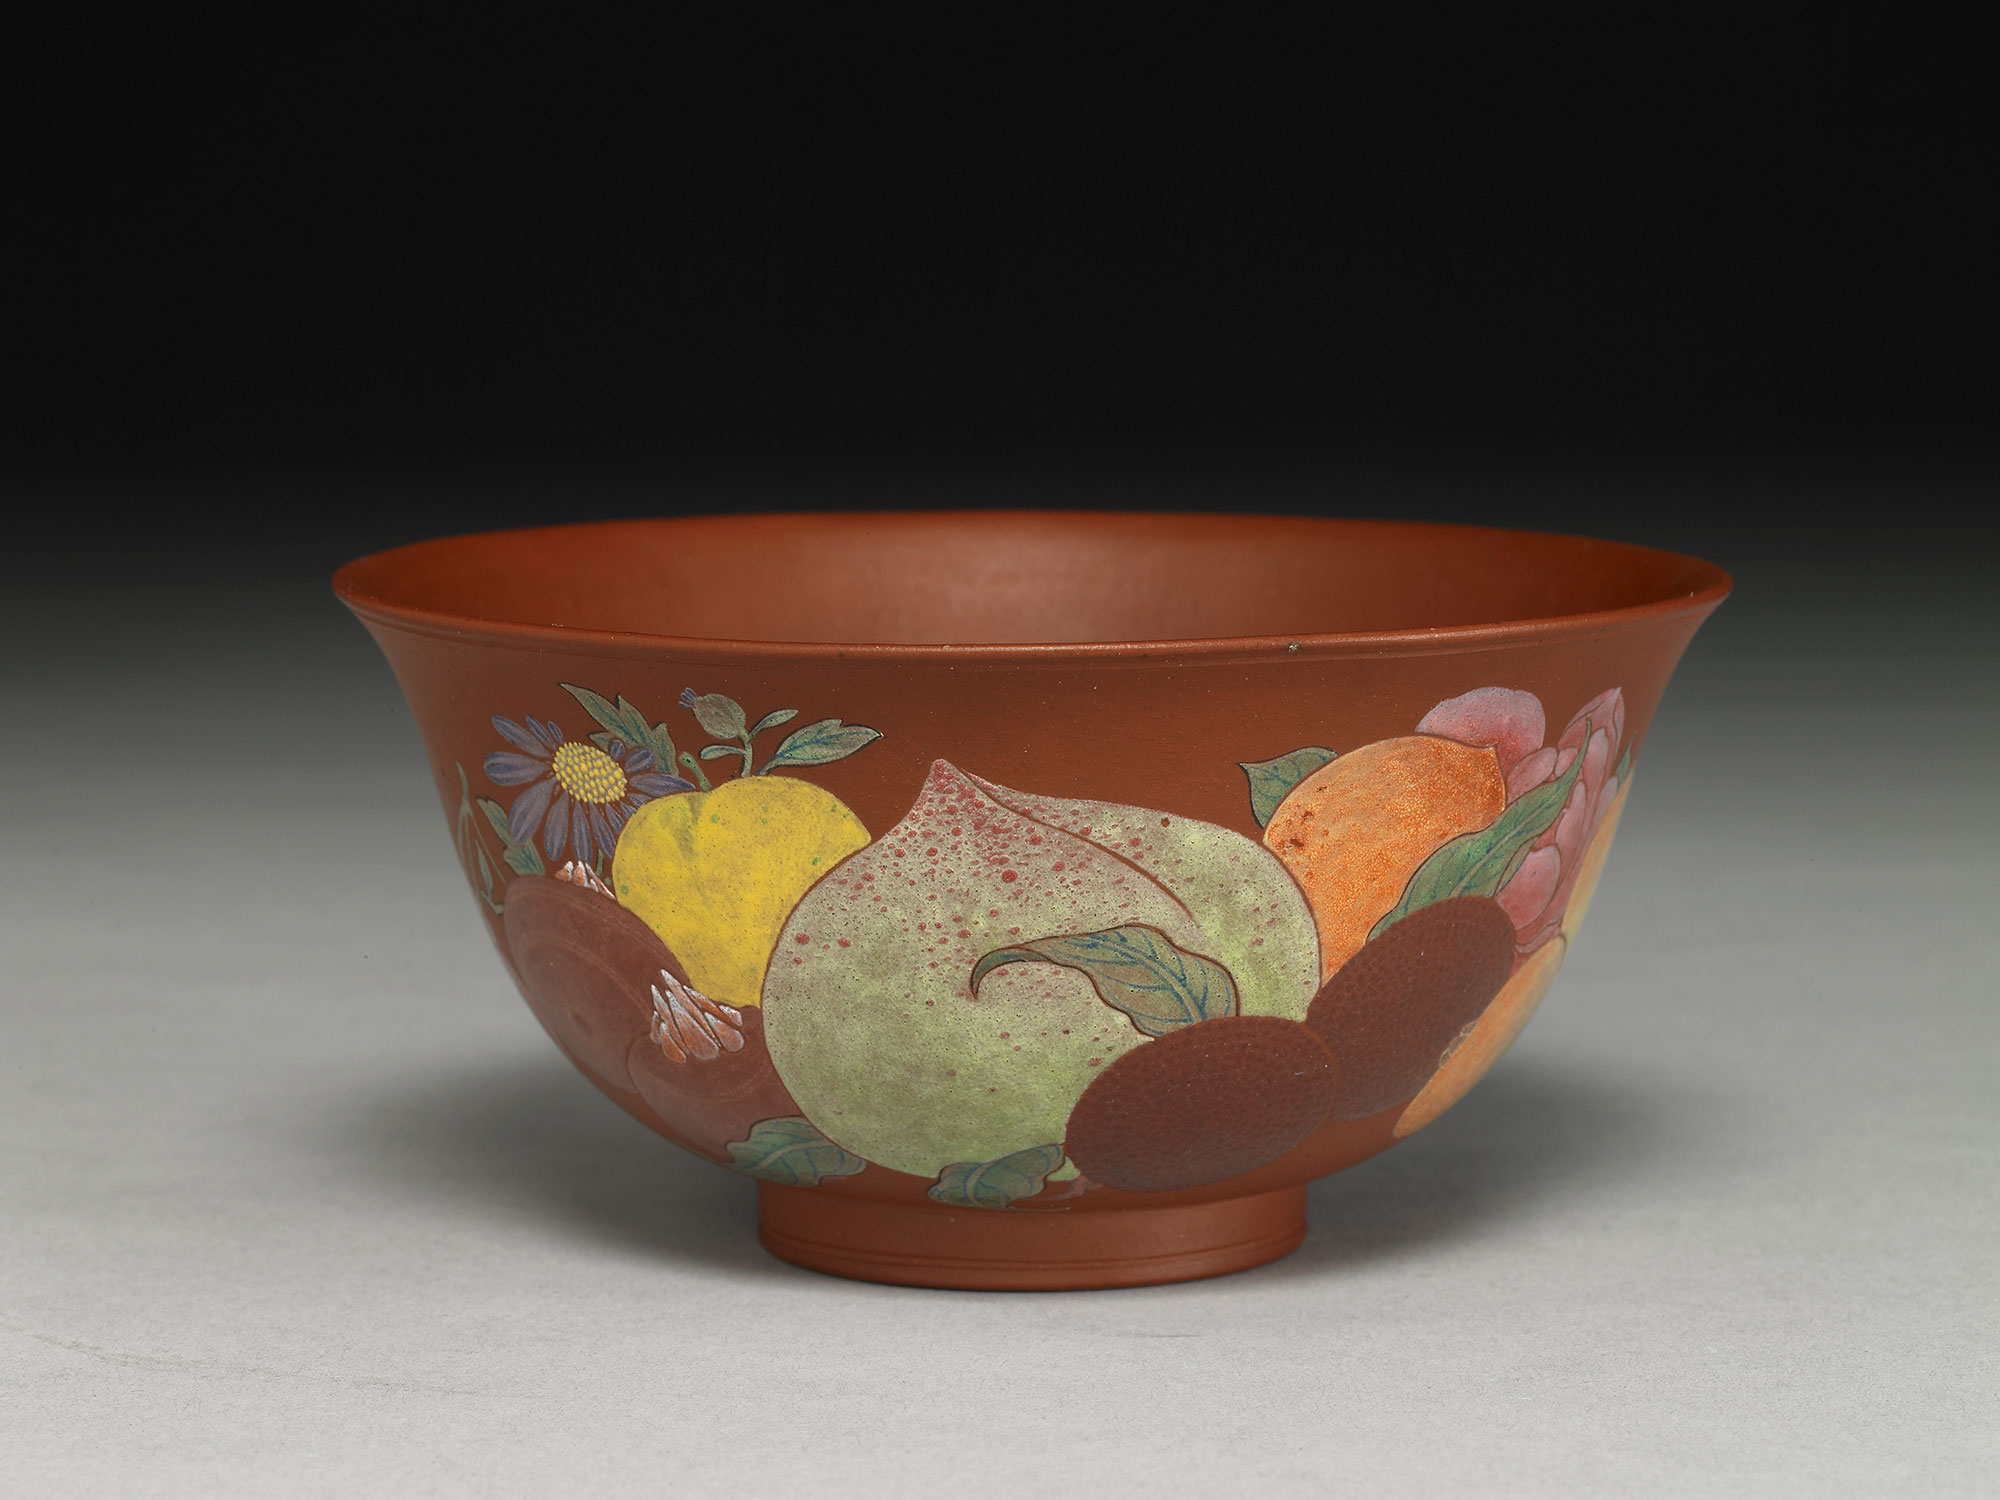 Yixing bowl with flowers and fruits in painted enamels